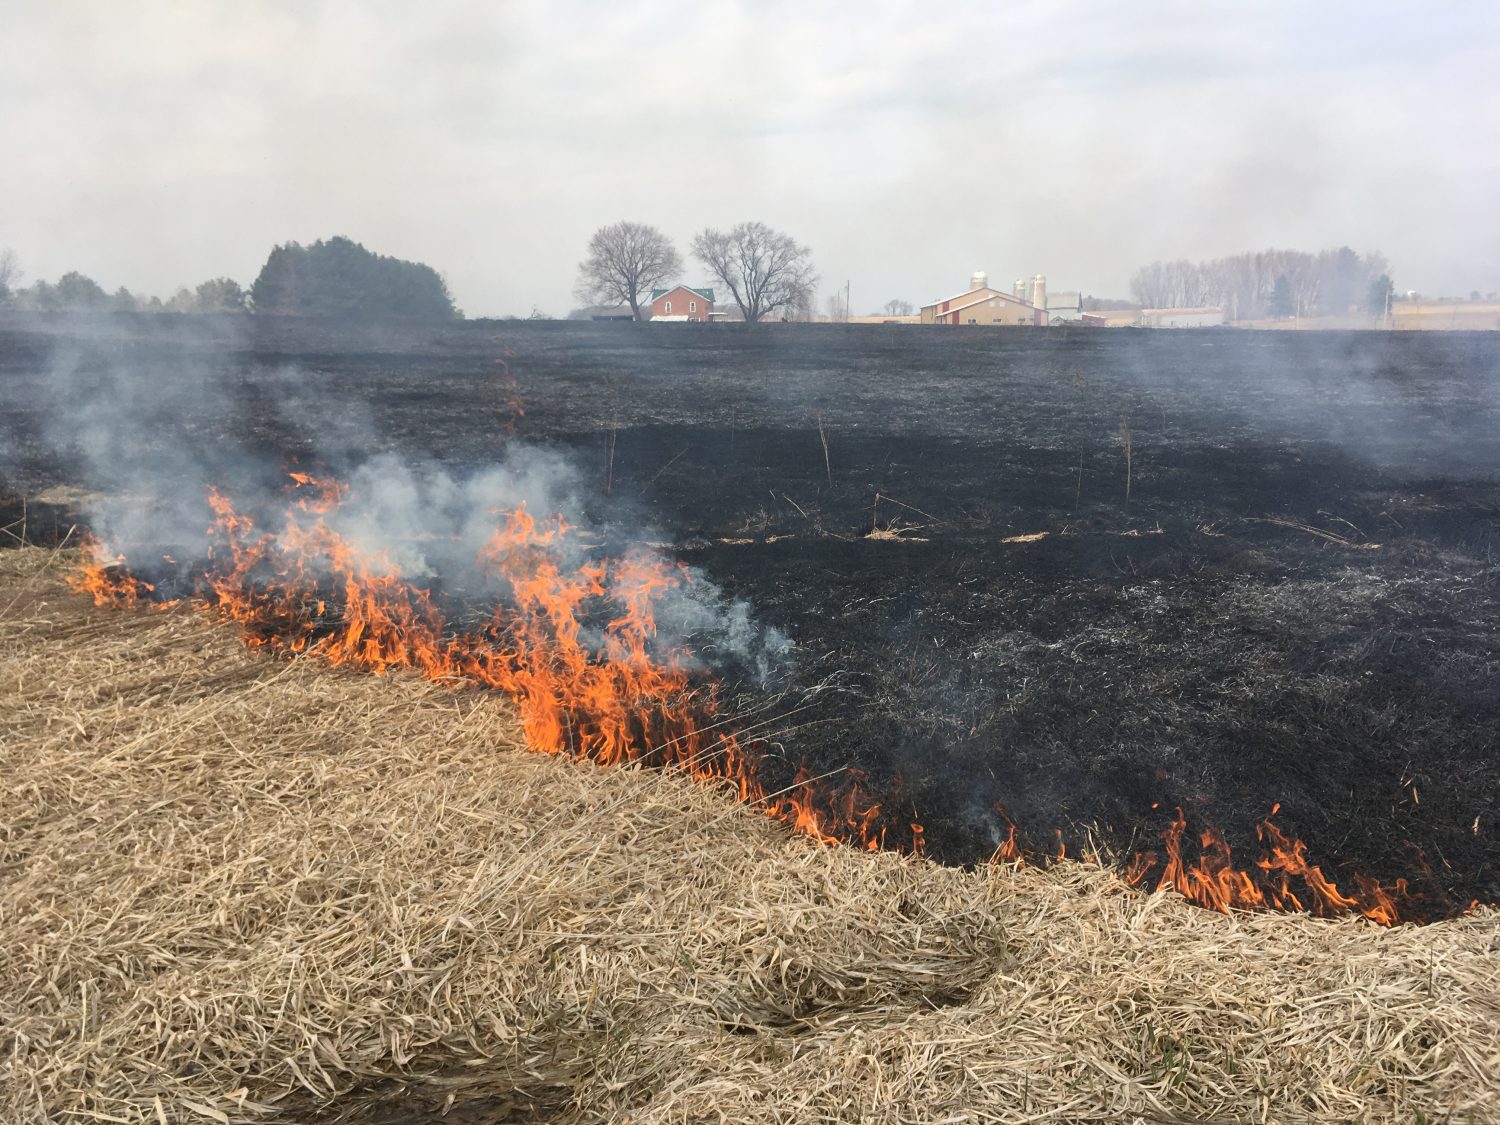 Ben Gruber performed a controlled burn at his farm, also known as Bear Creek Ranch, on April 8-9.